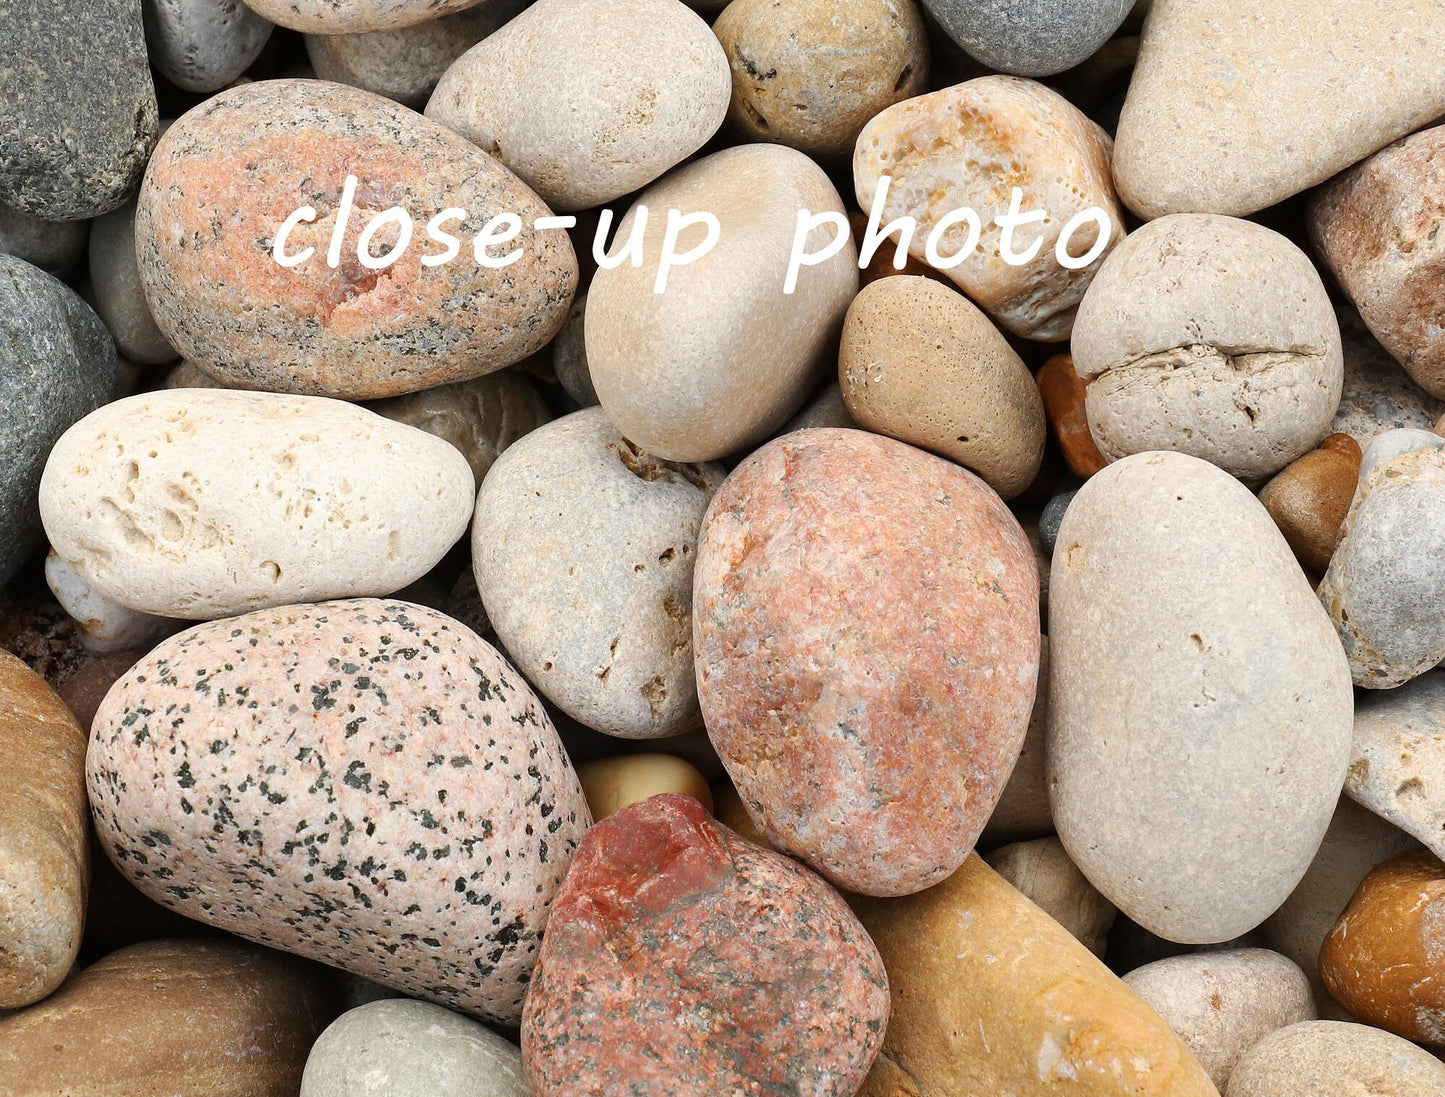 Pebbles art print, pebble beach photography, paper or canvas picture, photo of stones, rocks, Lake Michigan wall decor, sizes 5x7 to 32x48"